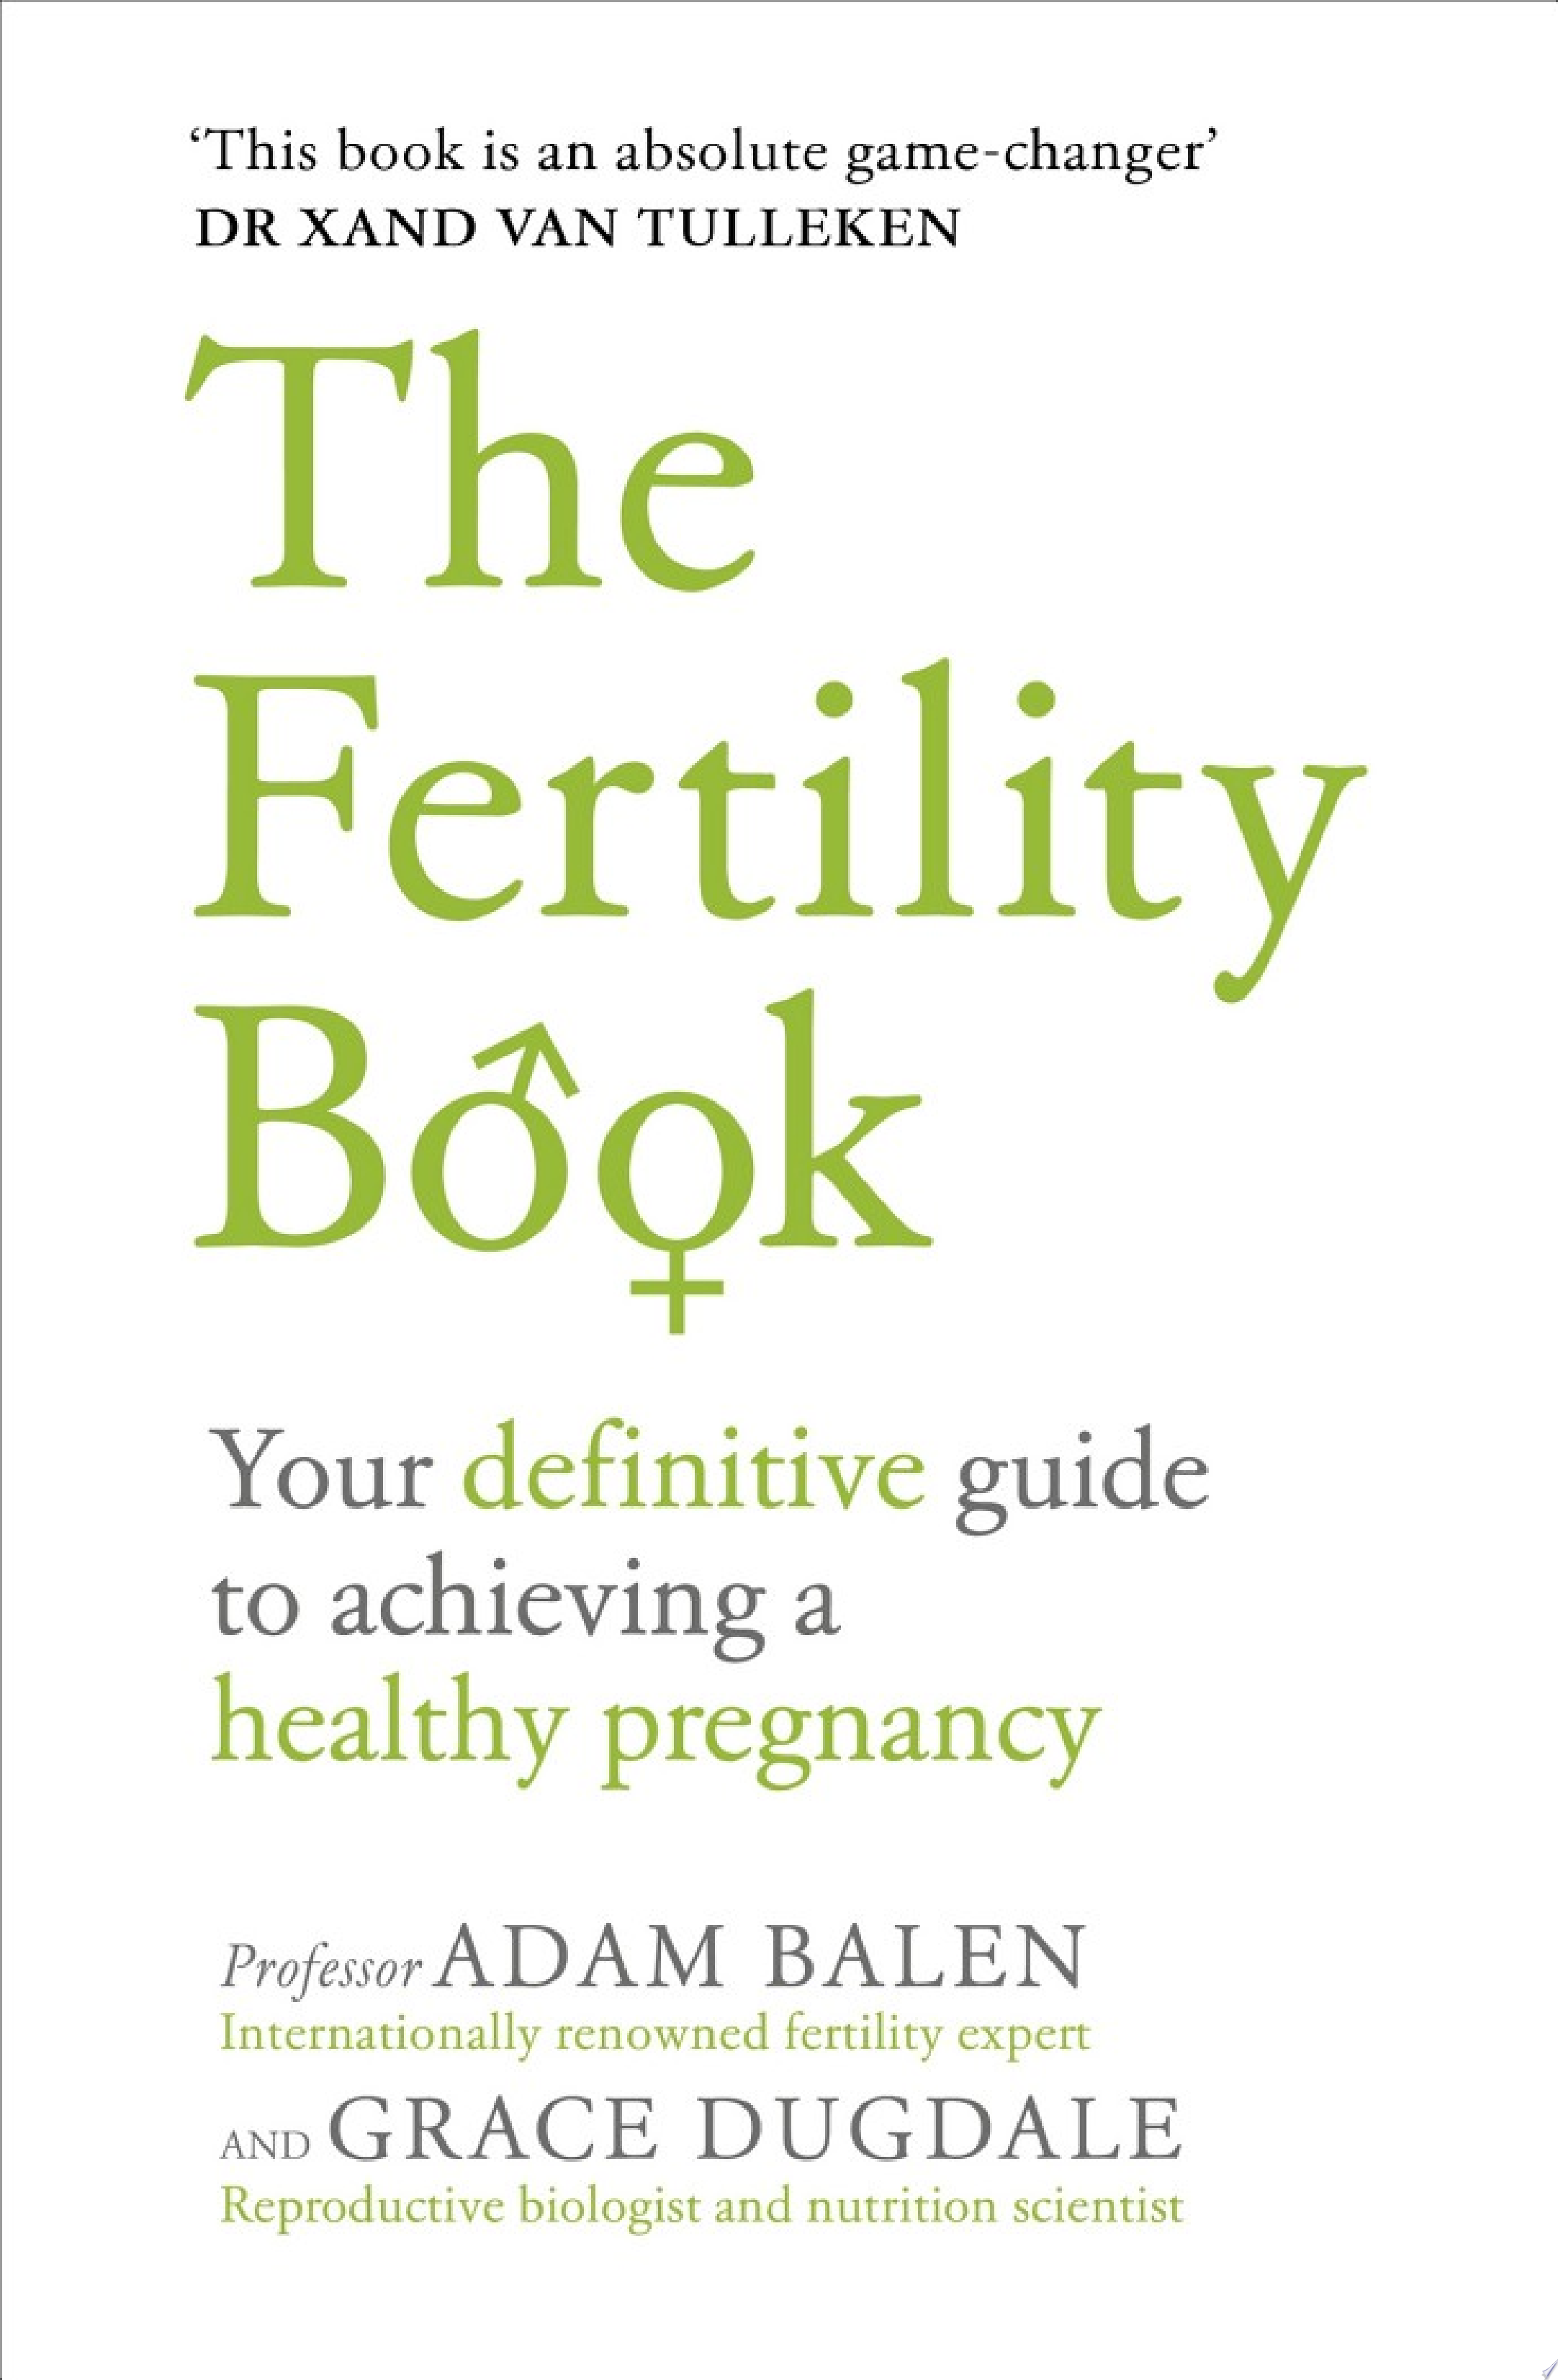 Image for "The Fertility Book"